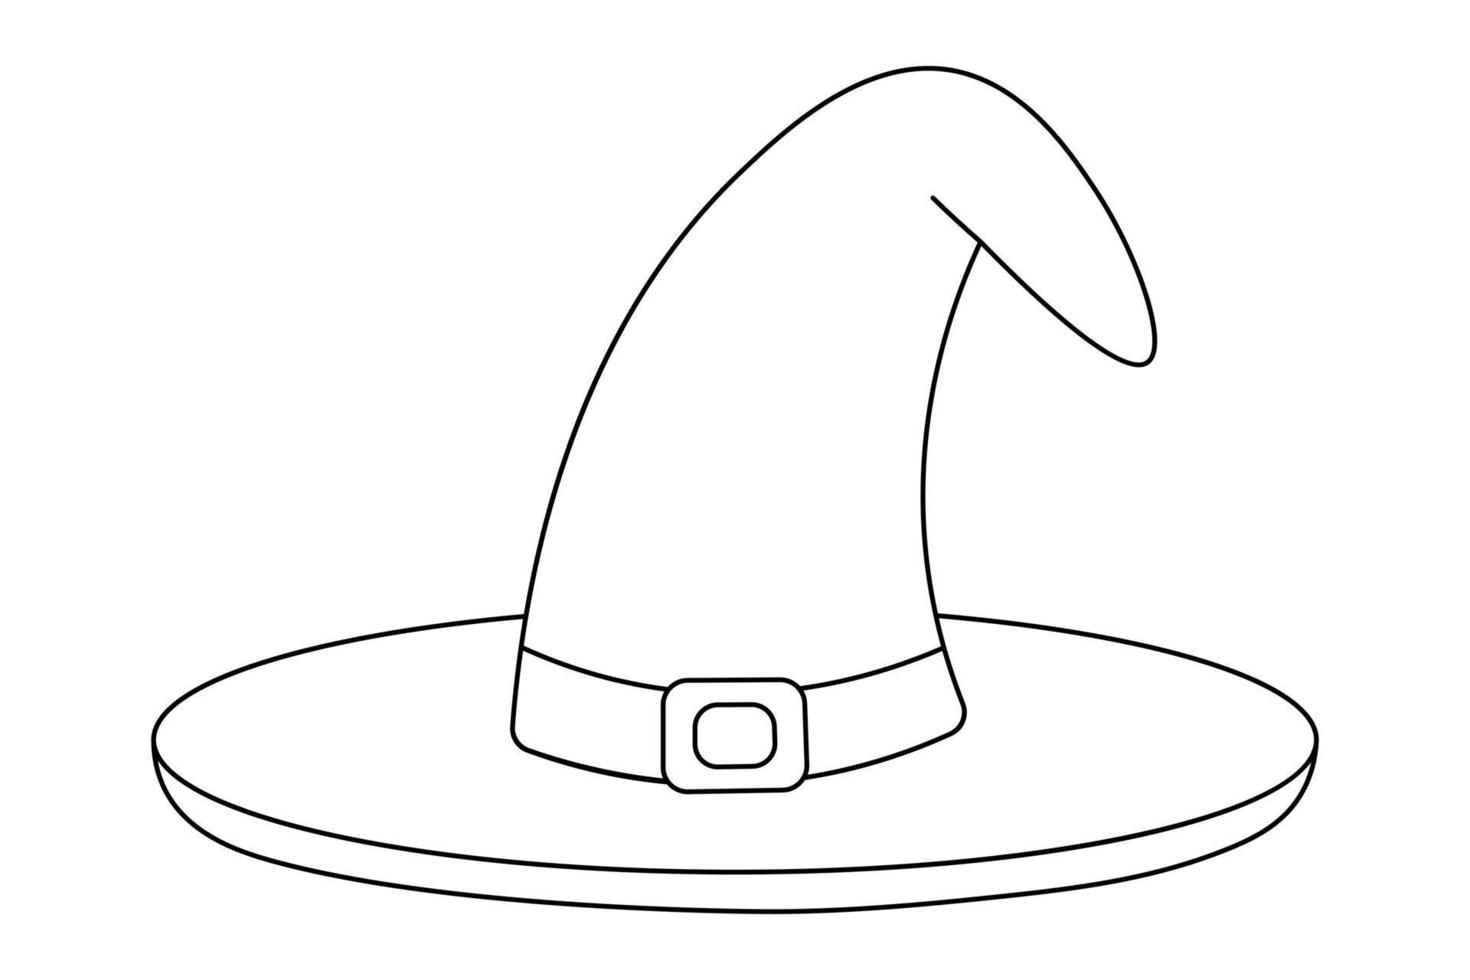 Witch hat. Vector illustration. Doodle style. Sketch. Coloring book for children. Halloween symbol. Buckle decoration. Fabulous headdress. Decoration for All Saints Day. Idea for web design.